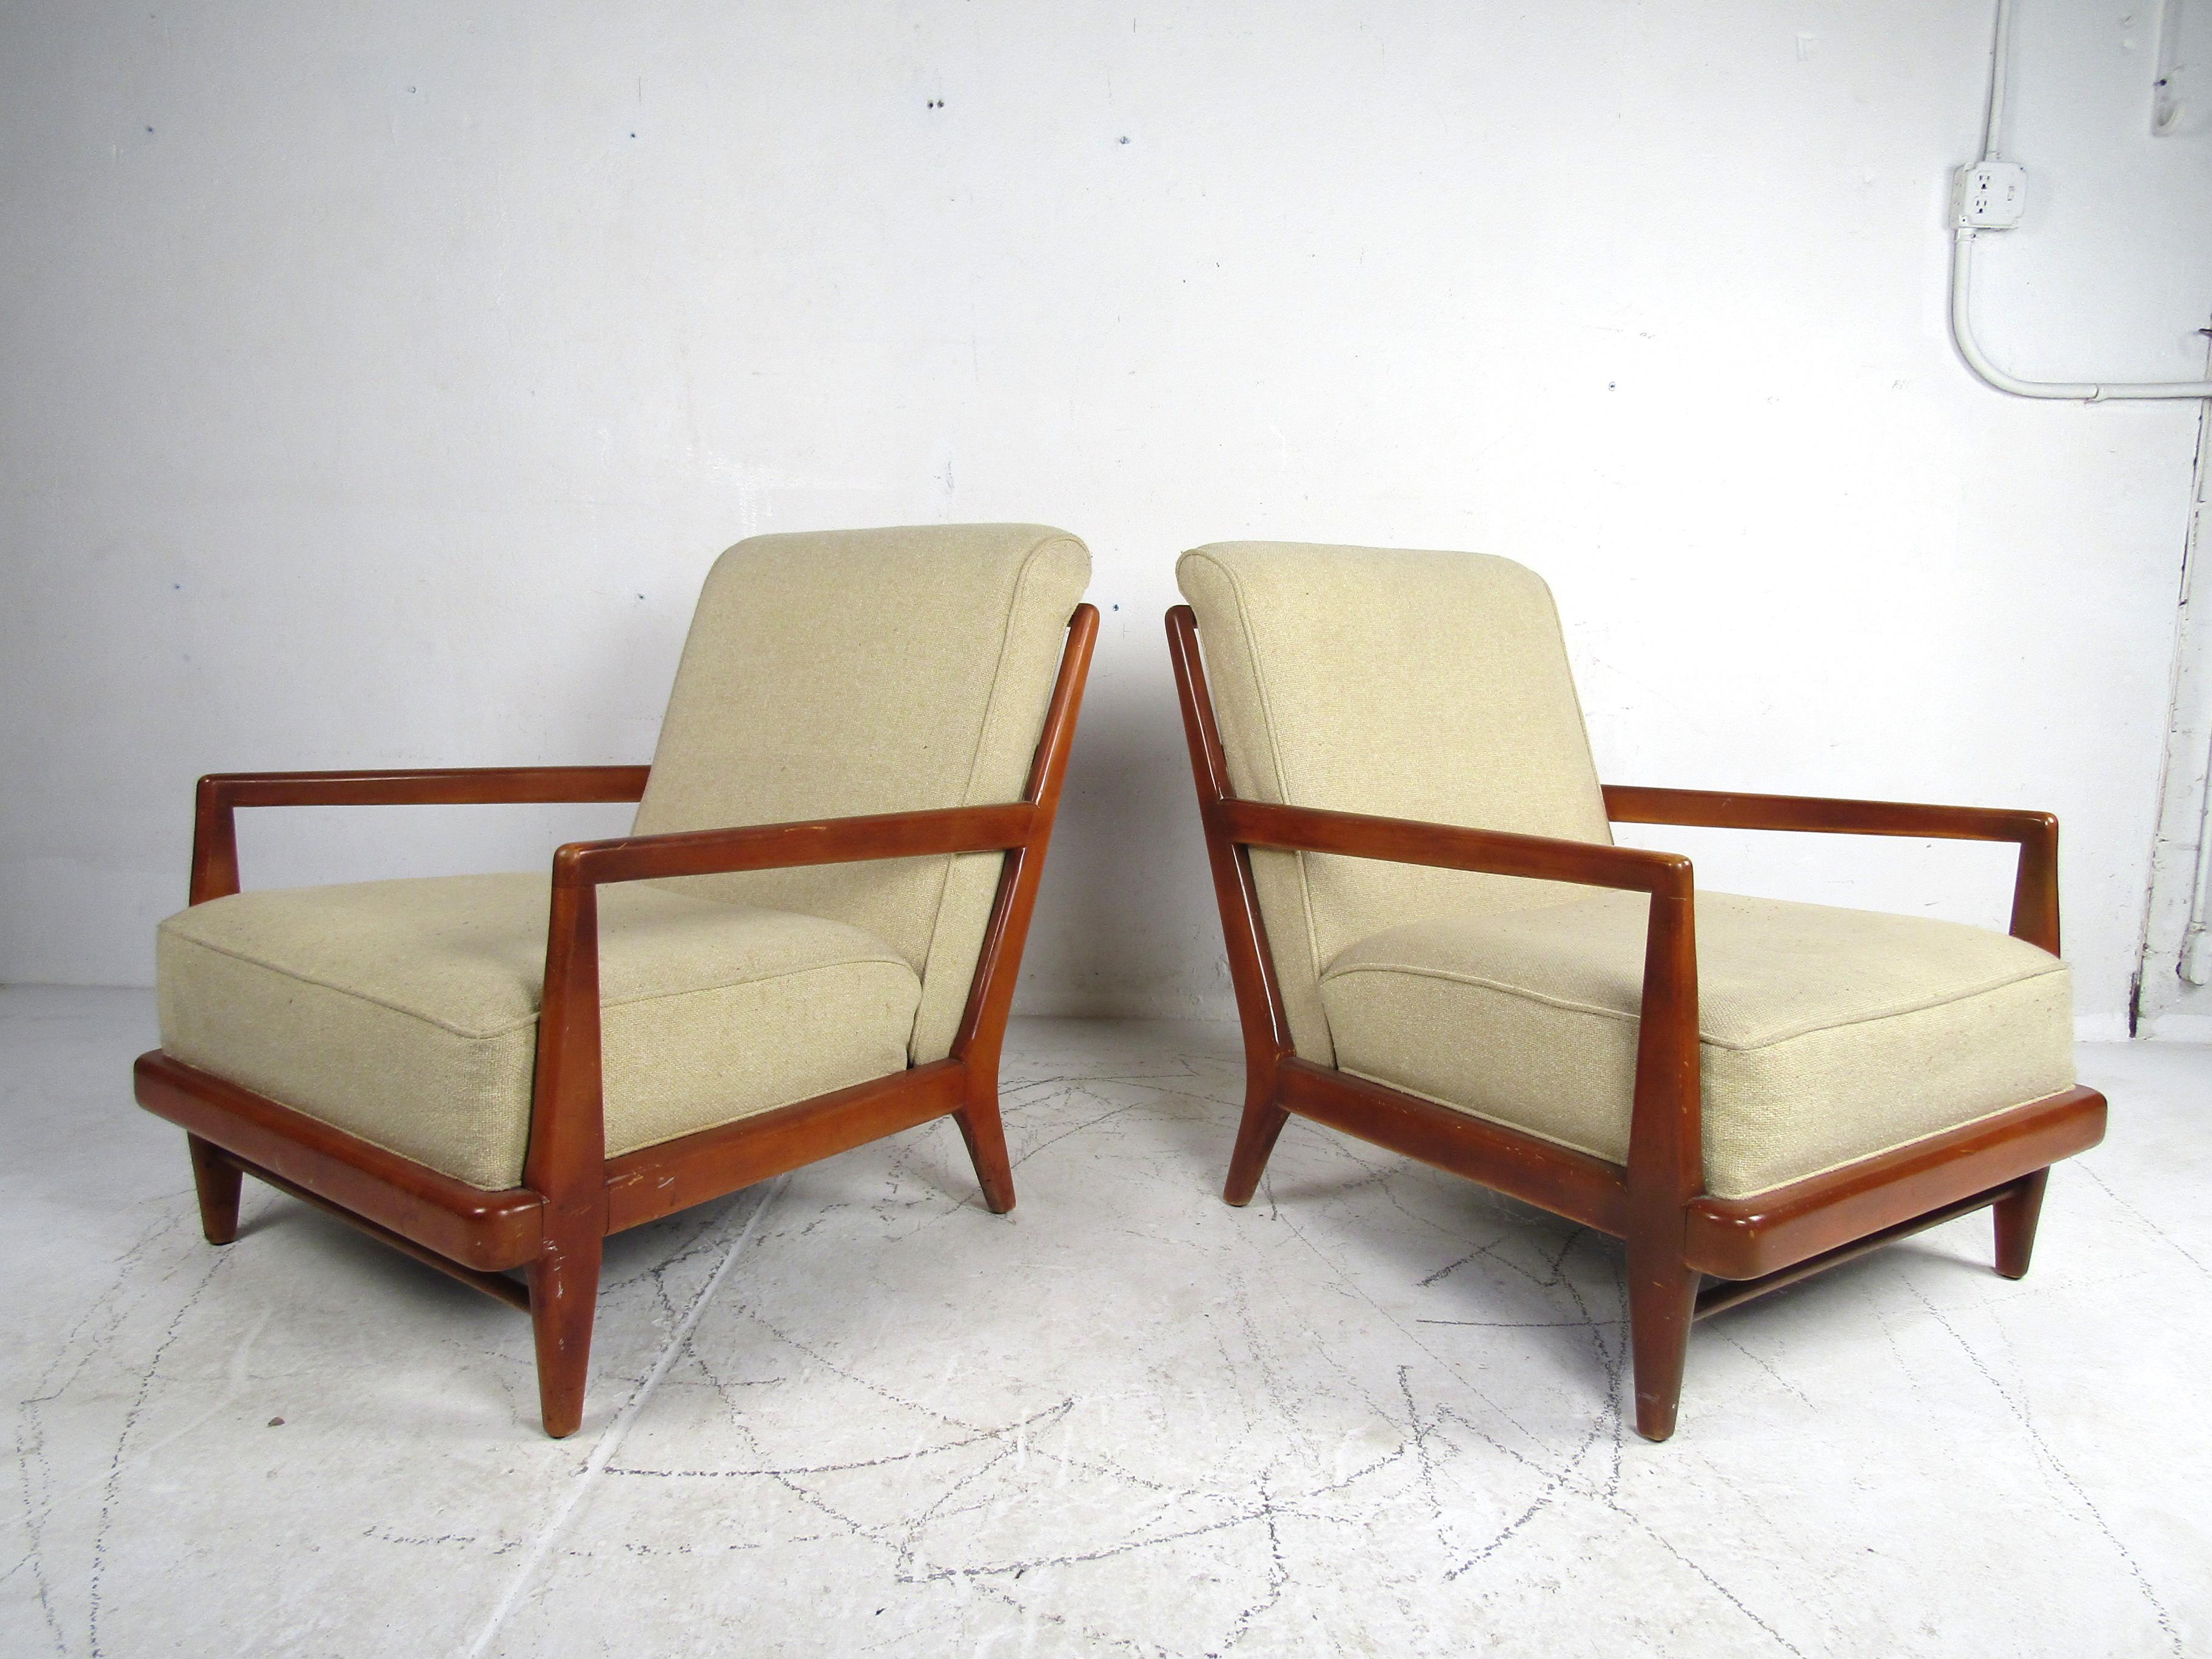 Stylish pair of midcentury Widdicomb lounge chairs. Spacious seating area with large semi-firm cushioning. Handsome angular wooden frames. A great addition to any modern interior's seating arrangement. Please confirm item location with dealer (NJ or